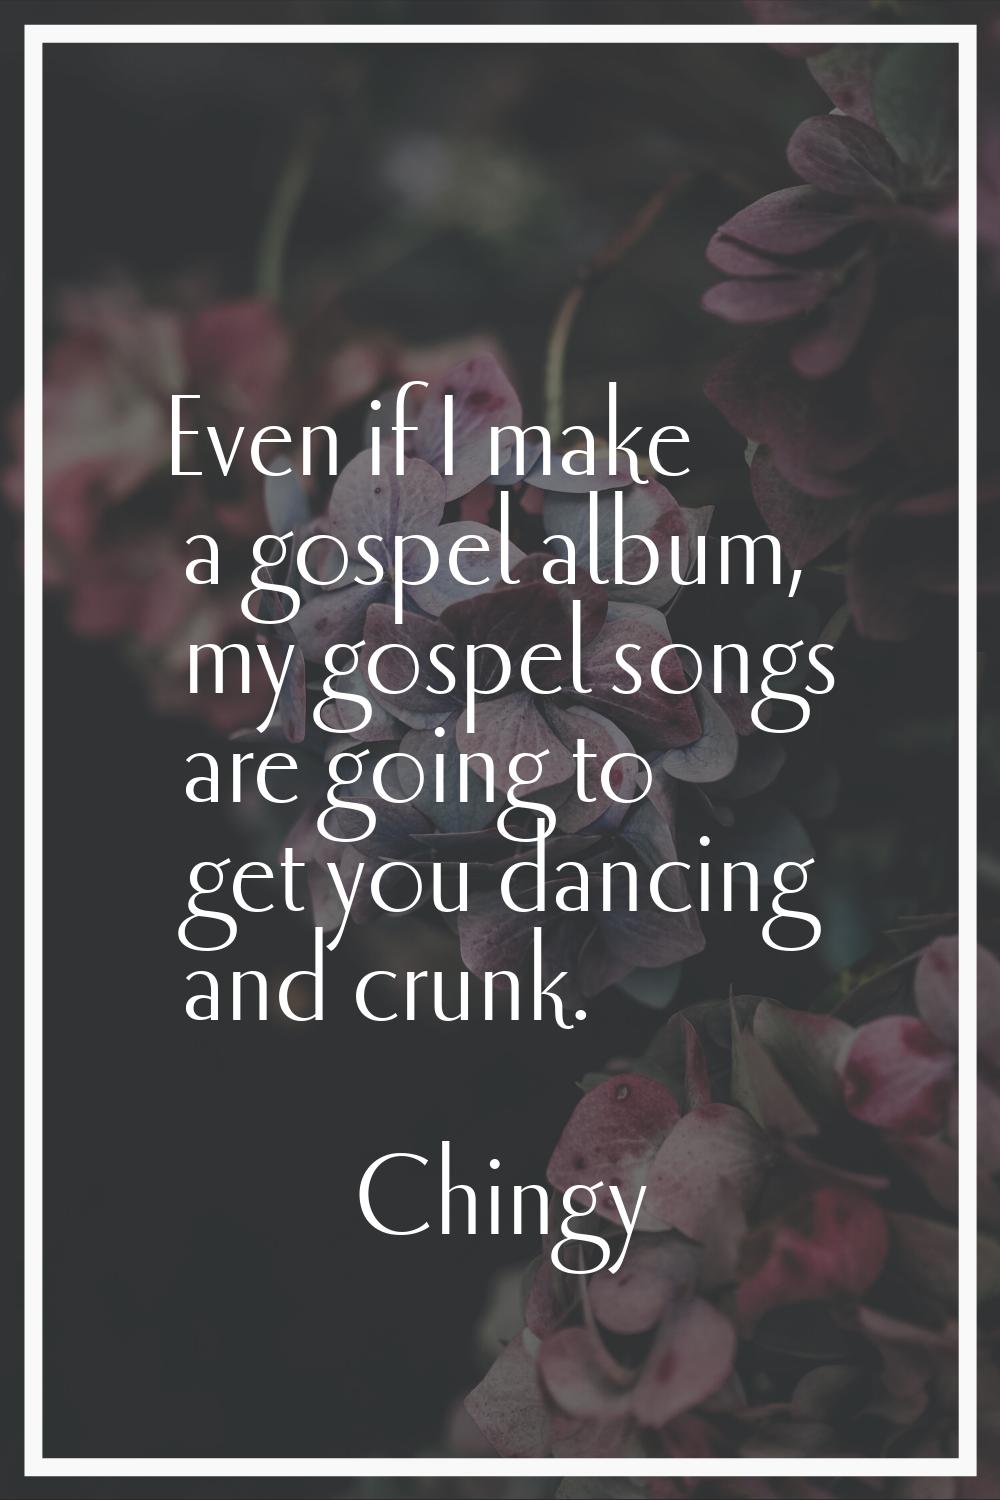 Even if I make a gospel album, my gospel songs are going to get you dancing and crunk.